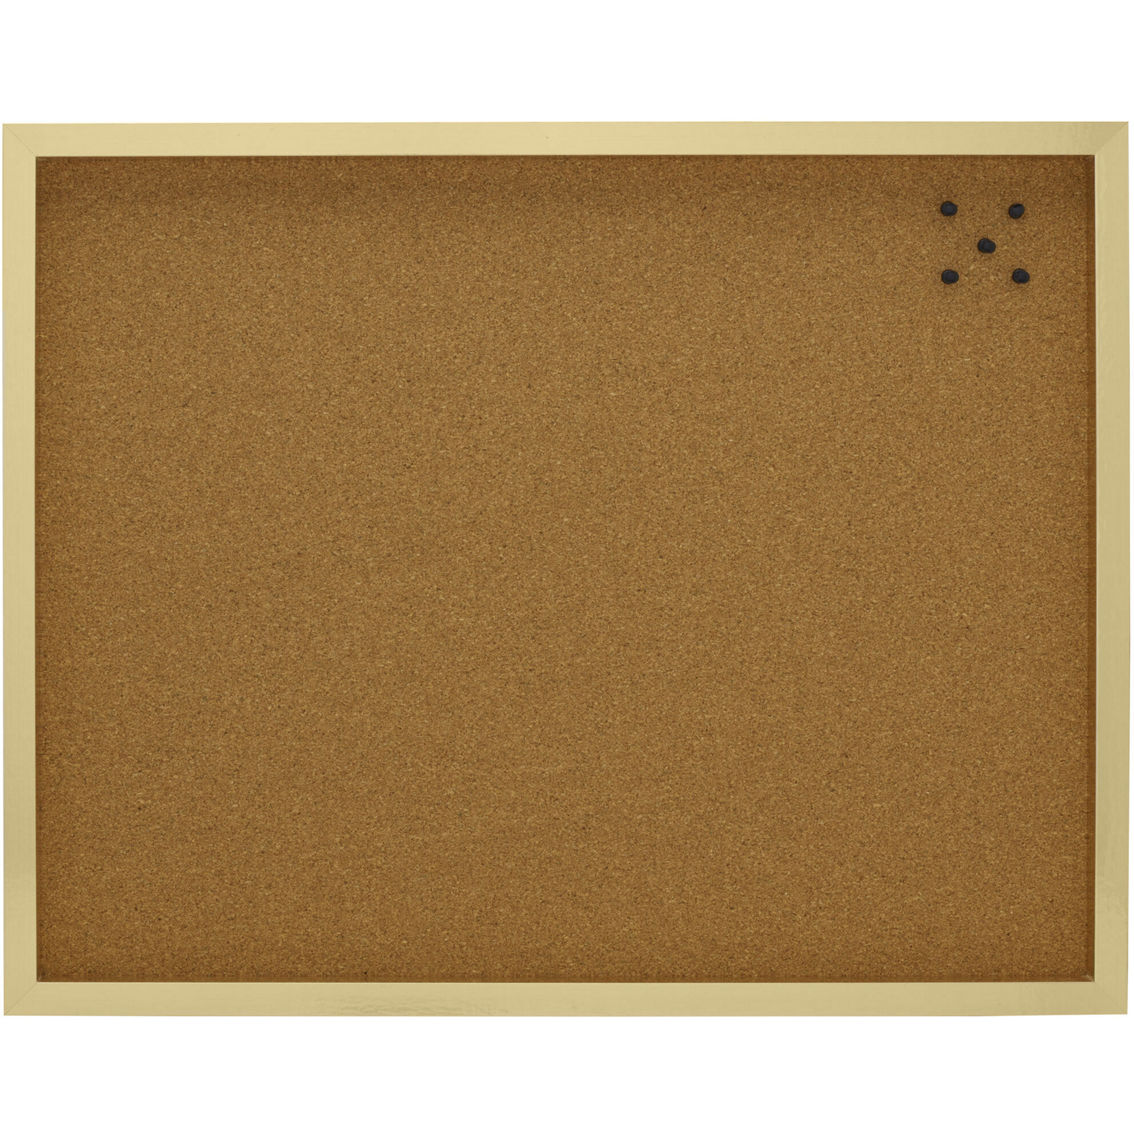 Mikasa Home 24 x 19 in. Cork Board with 5 Tacks - Image 2 of 3